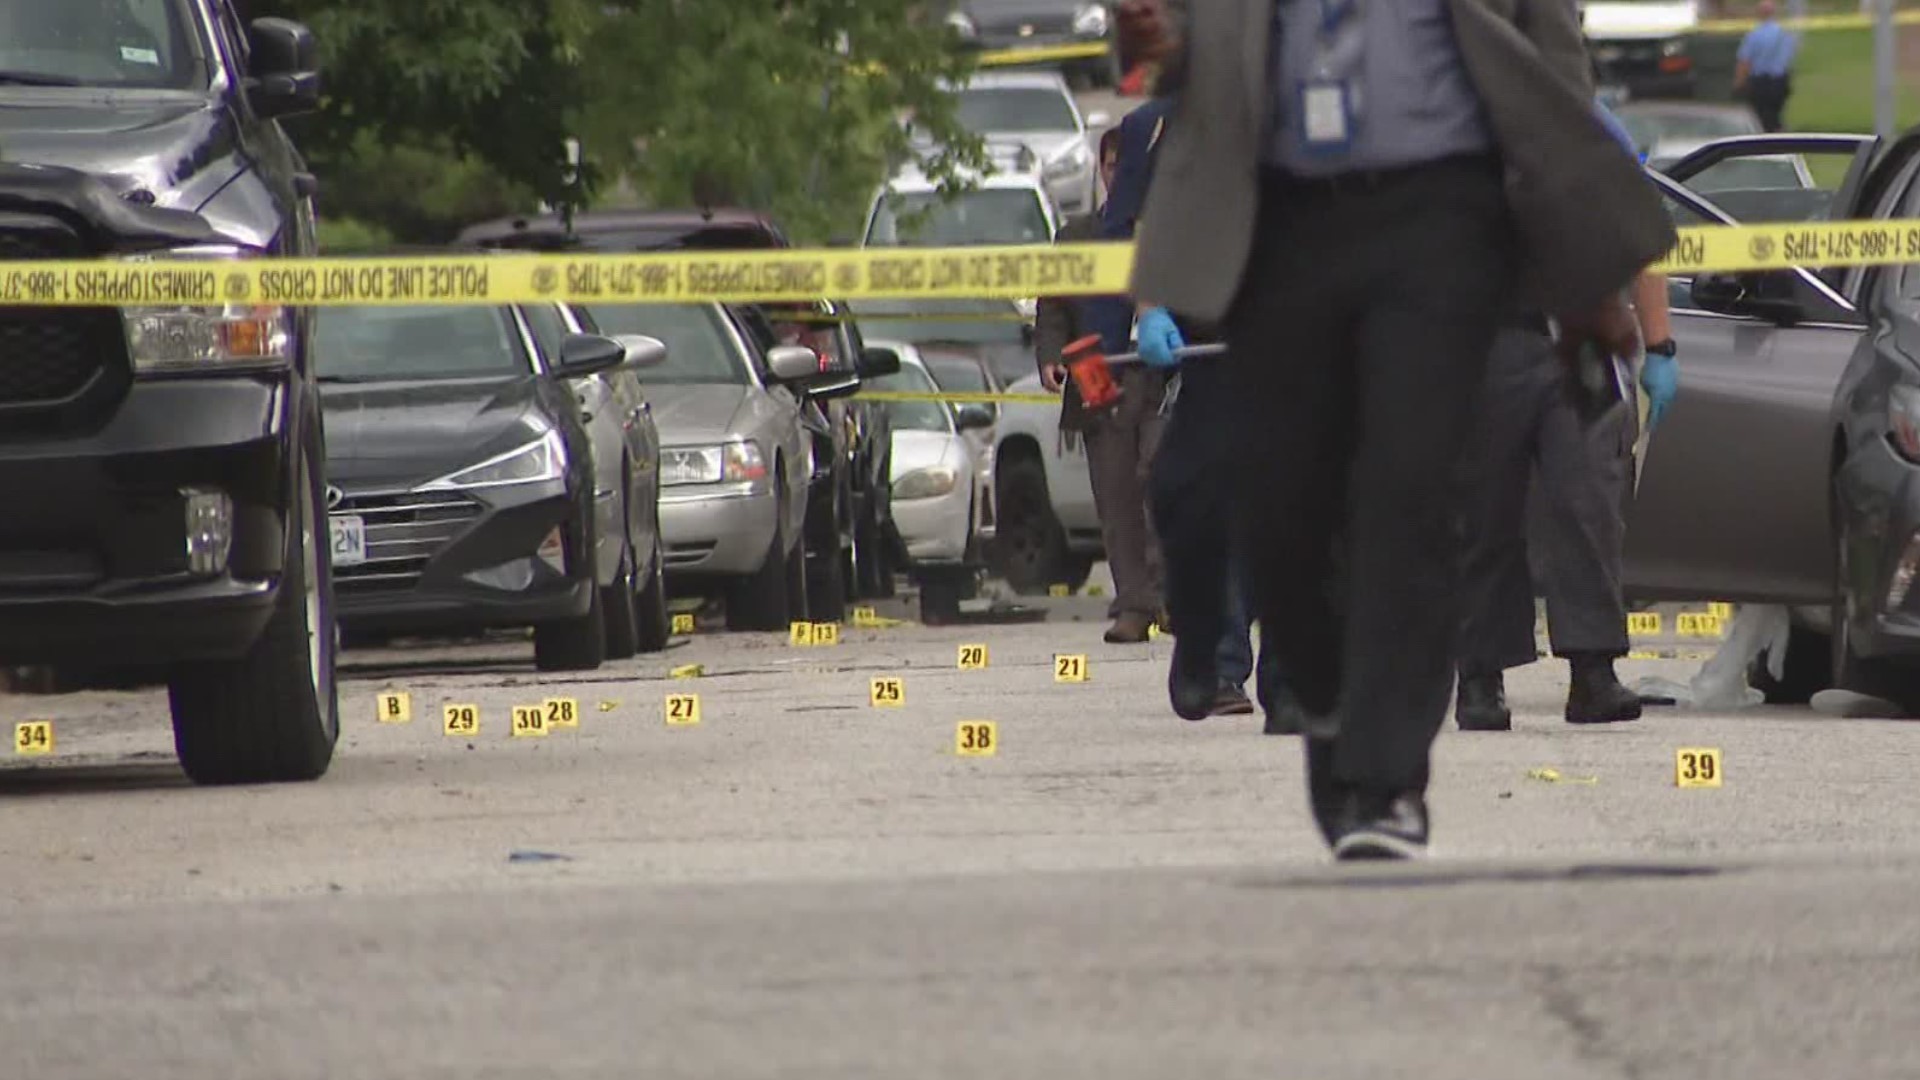 5 On Your Side's Robert Townsend takes a look at the alarming and rising number of shootings in St. Louis